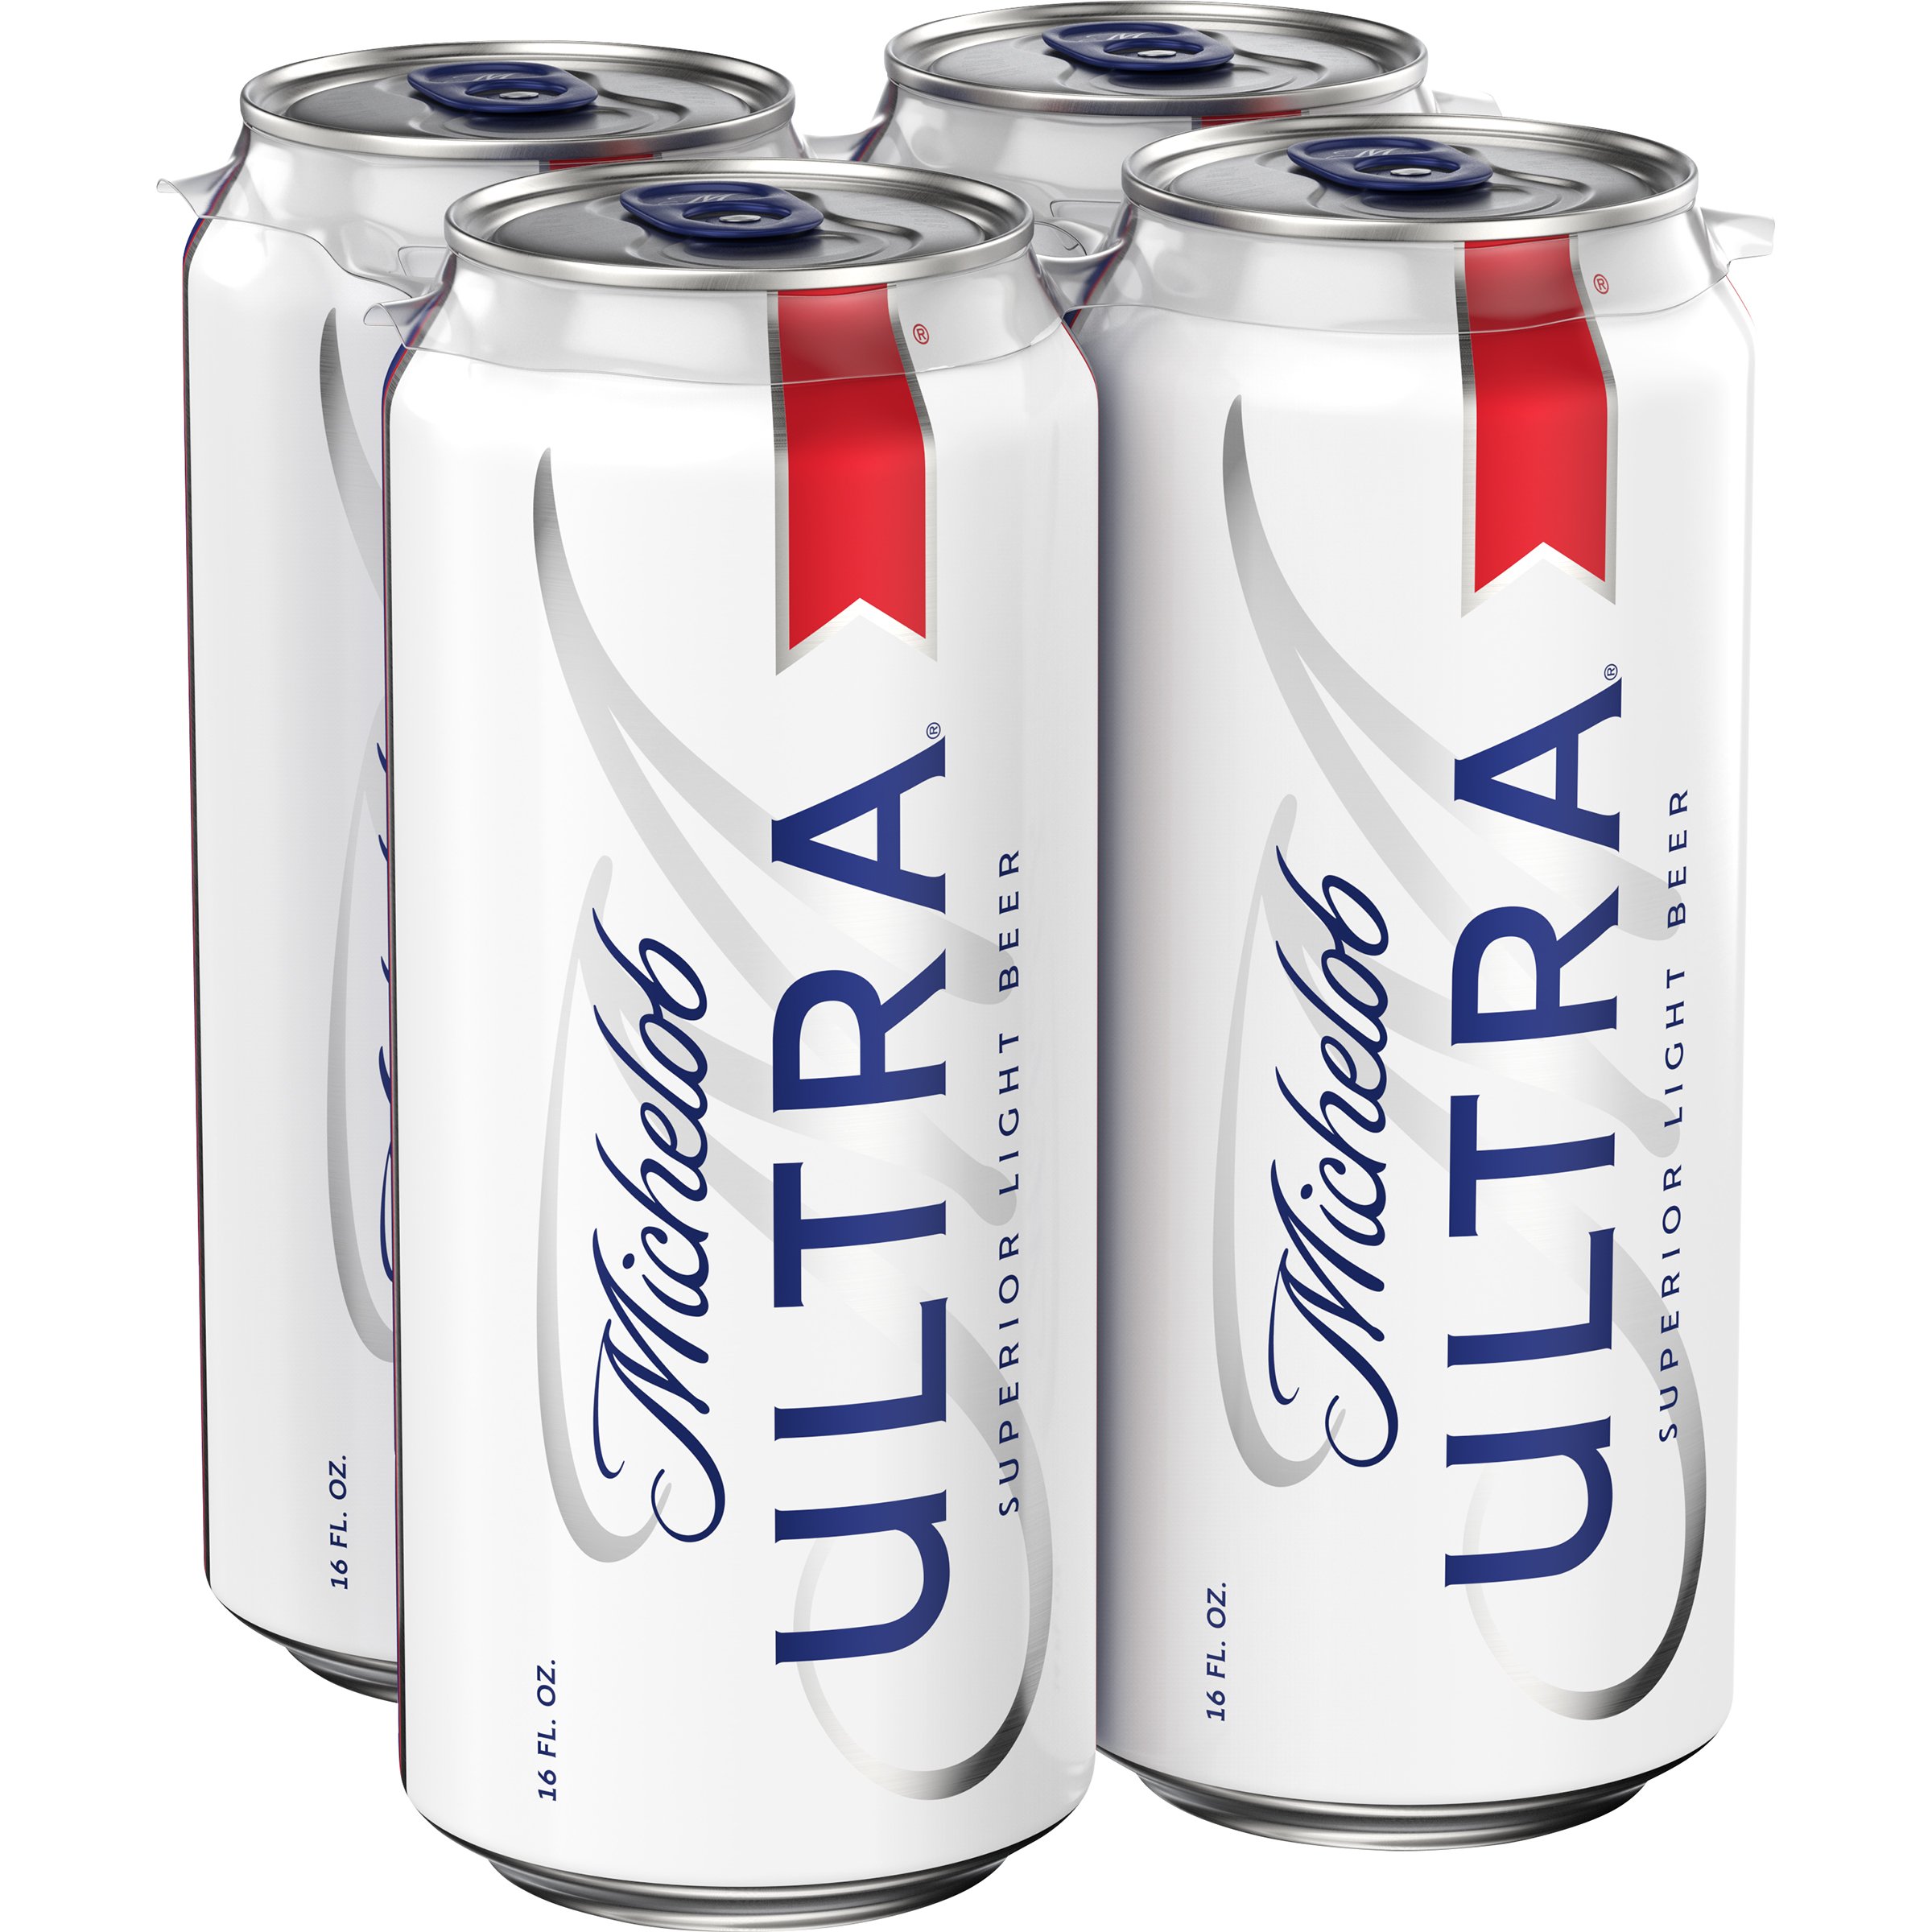 michelob-ultra-beer-16-oz-cans-shop-beer-at-h-e-b